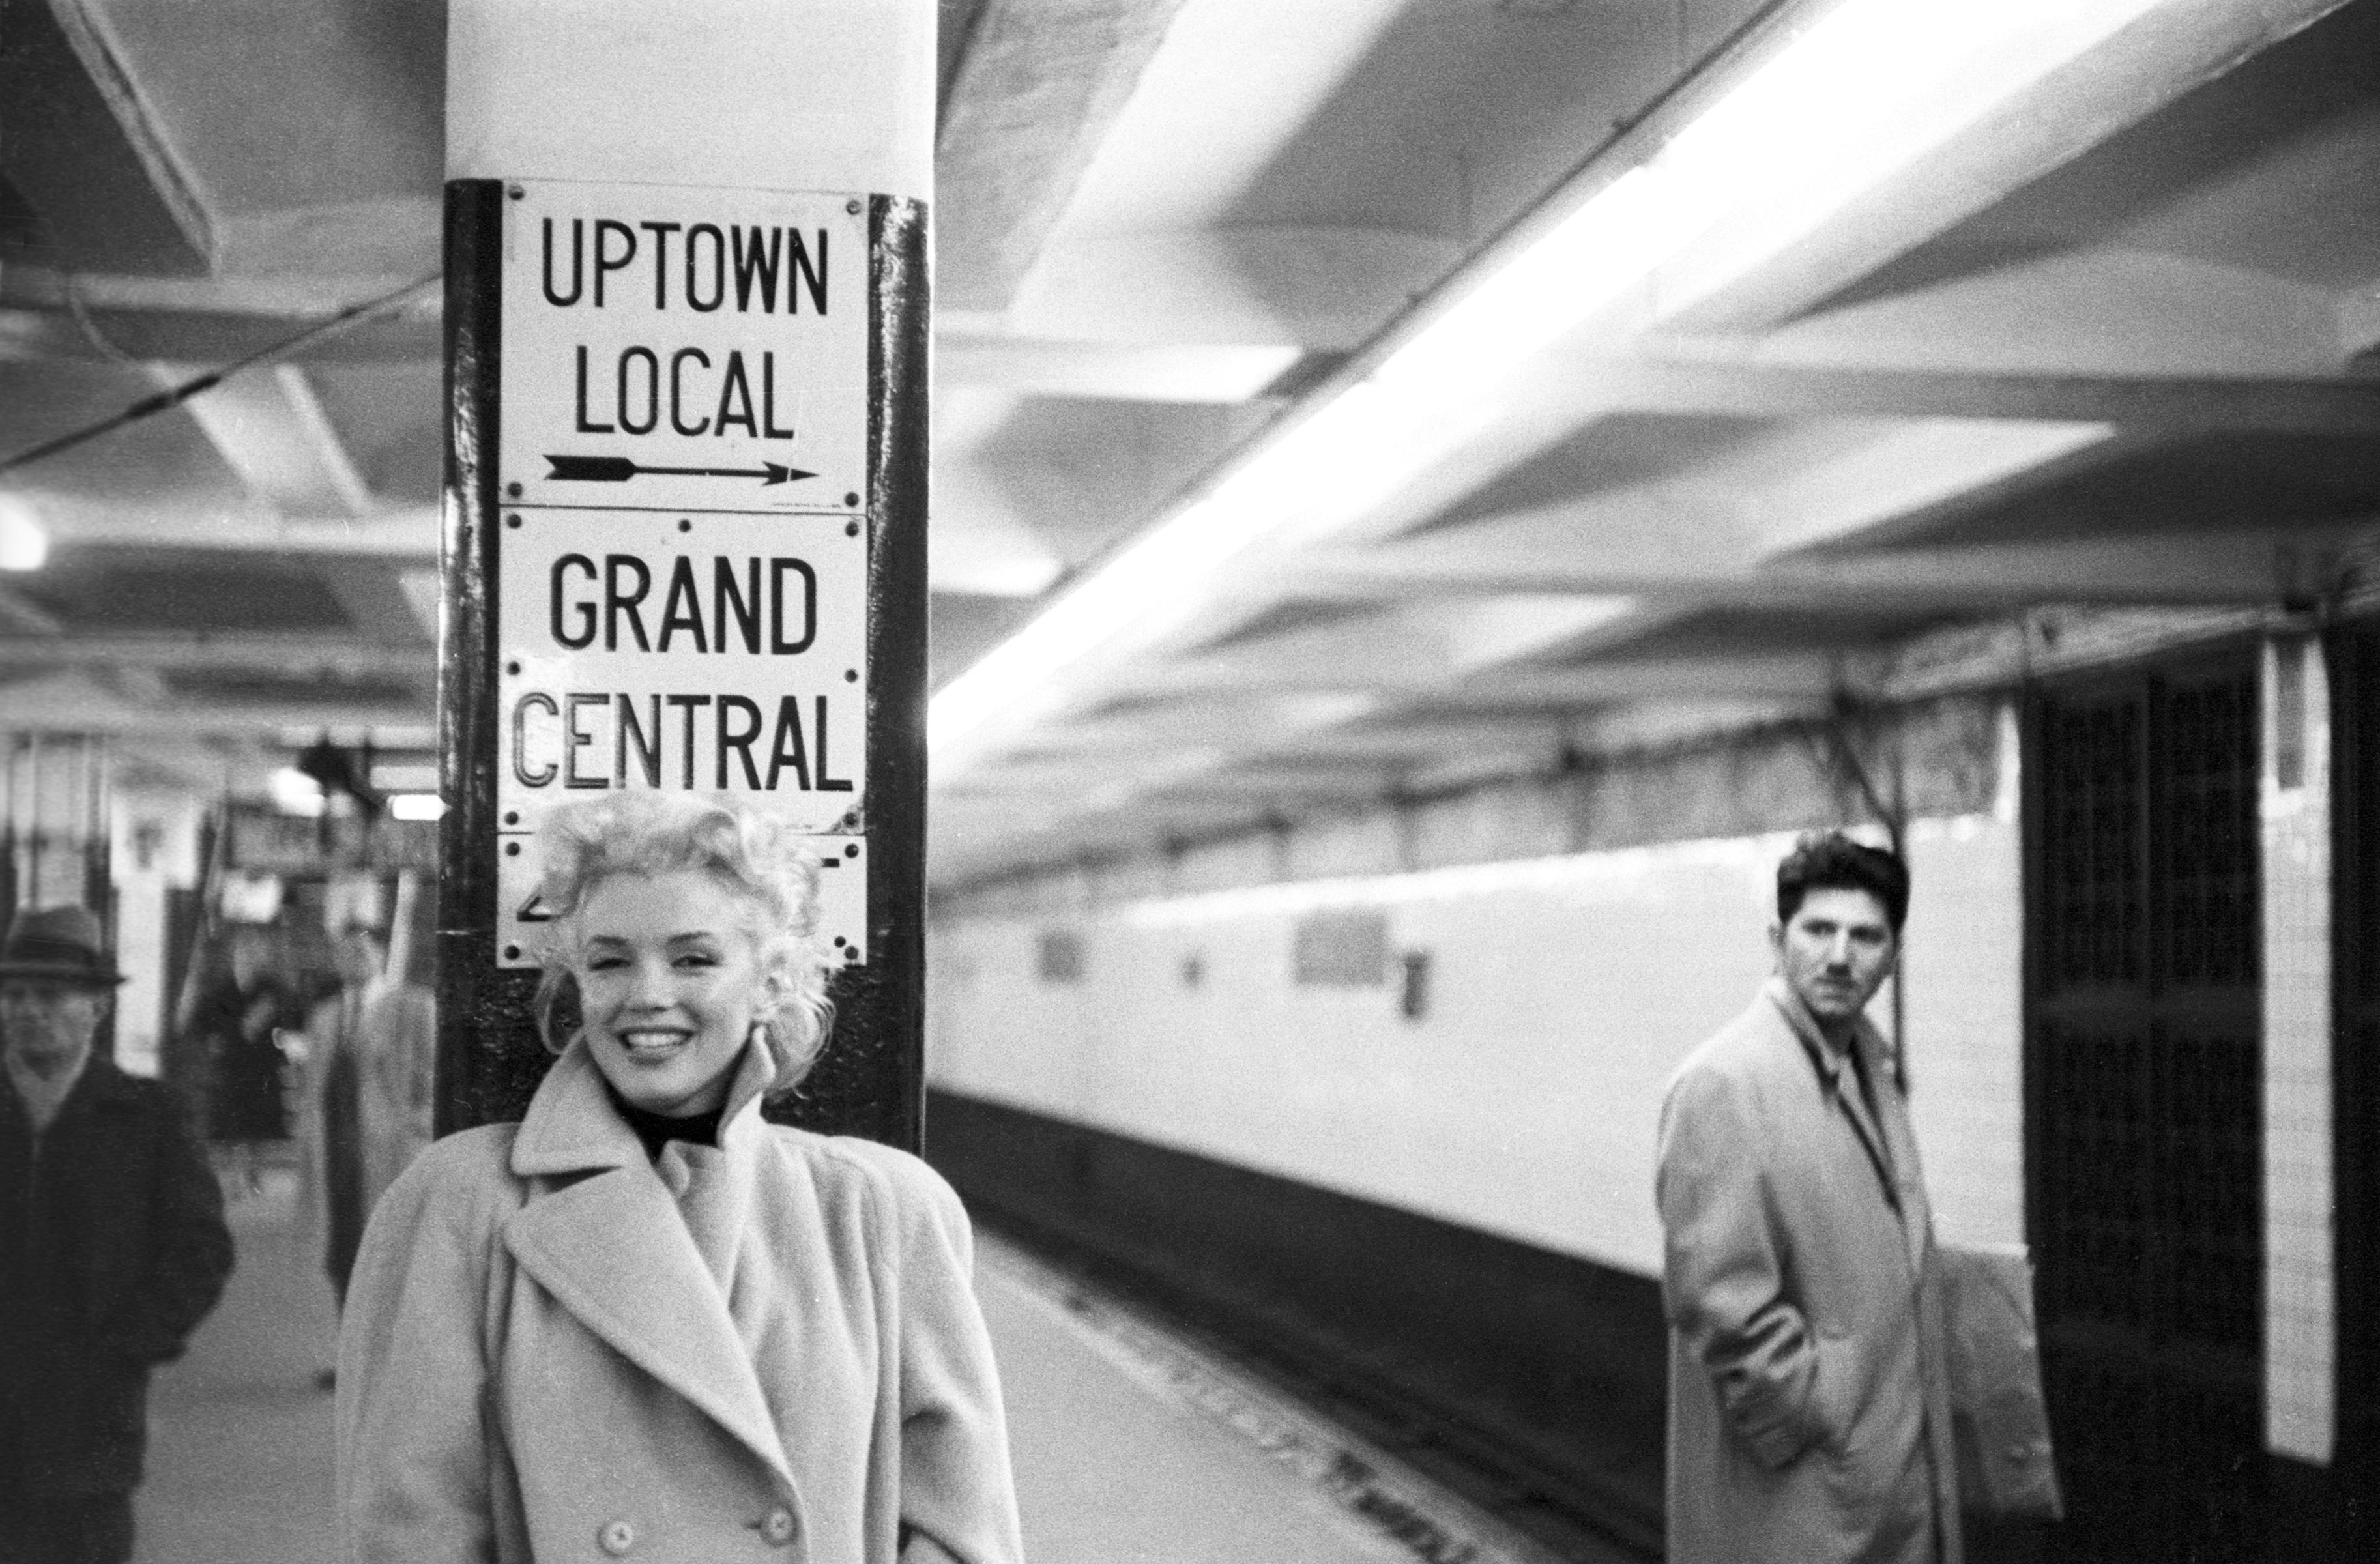 Ed Feingersh 'Marilyn Monroe in Grand Central' Limited Edition Photograph, 20x16